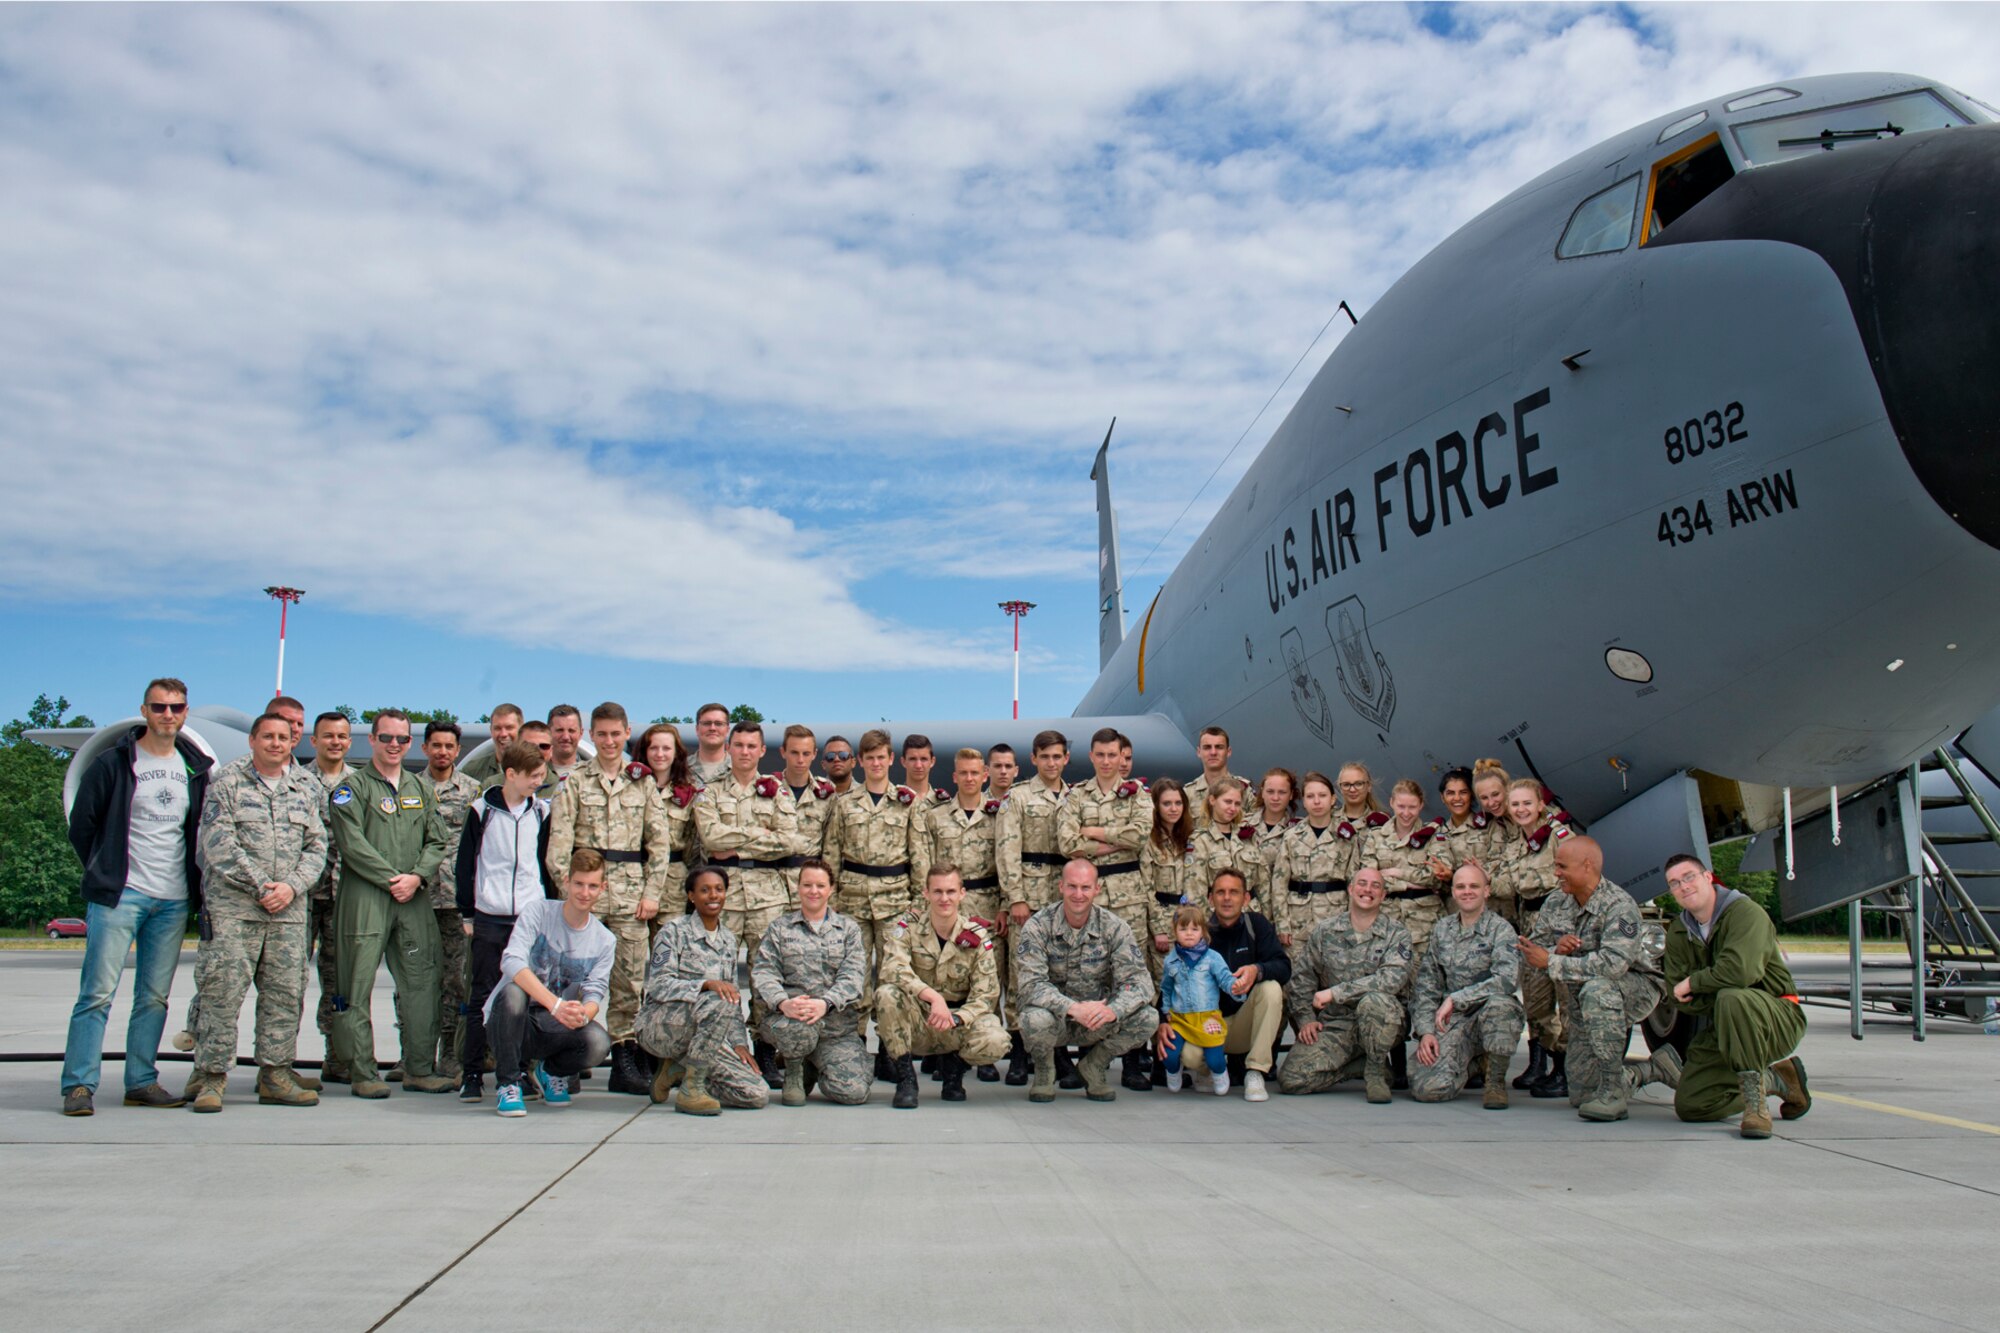 High school students from a military class at Adam Mickiewicz High School Complex, Kleczew, Poland, and U.S. Air Force Airmen pose for a group photo after at Powidz Air Base, Poland, where the 434th and 100th Air Refueling Wings are based while taking part in Baltic Operations 2016, June 9, 2016. This event allowed a younger generation from Poland to interact with U.S. Airmen and see firsthand how the U.S. Air Force operates. (U.S. Air Force photo/Senior Airman Erin Babis)